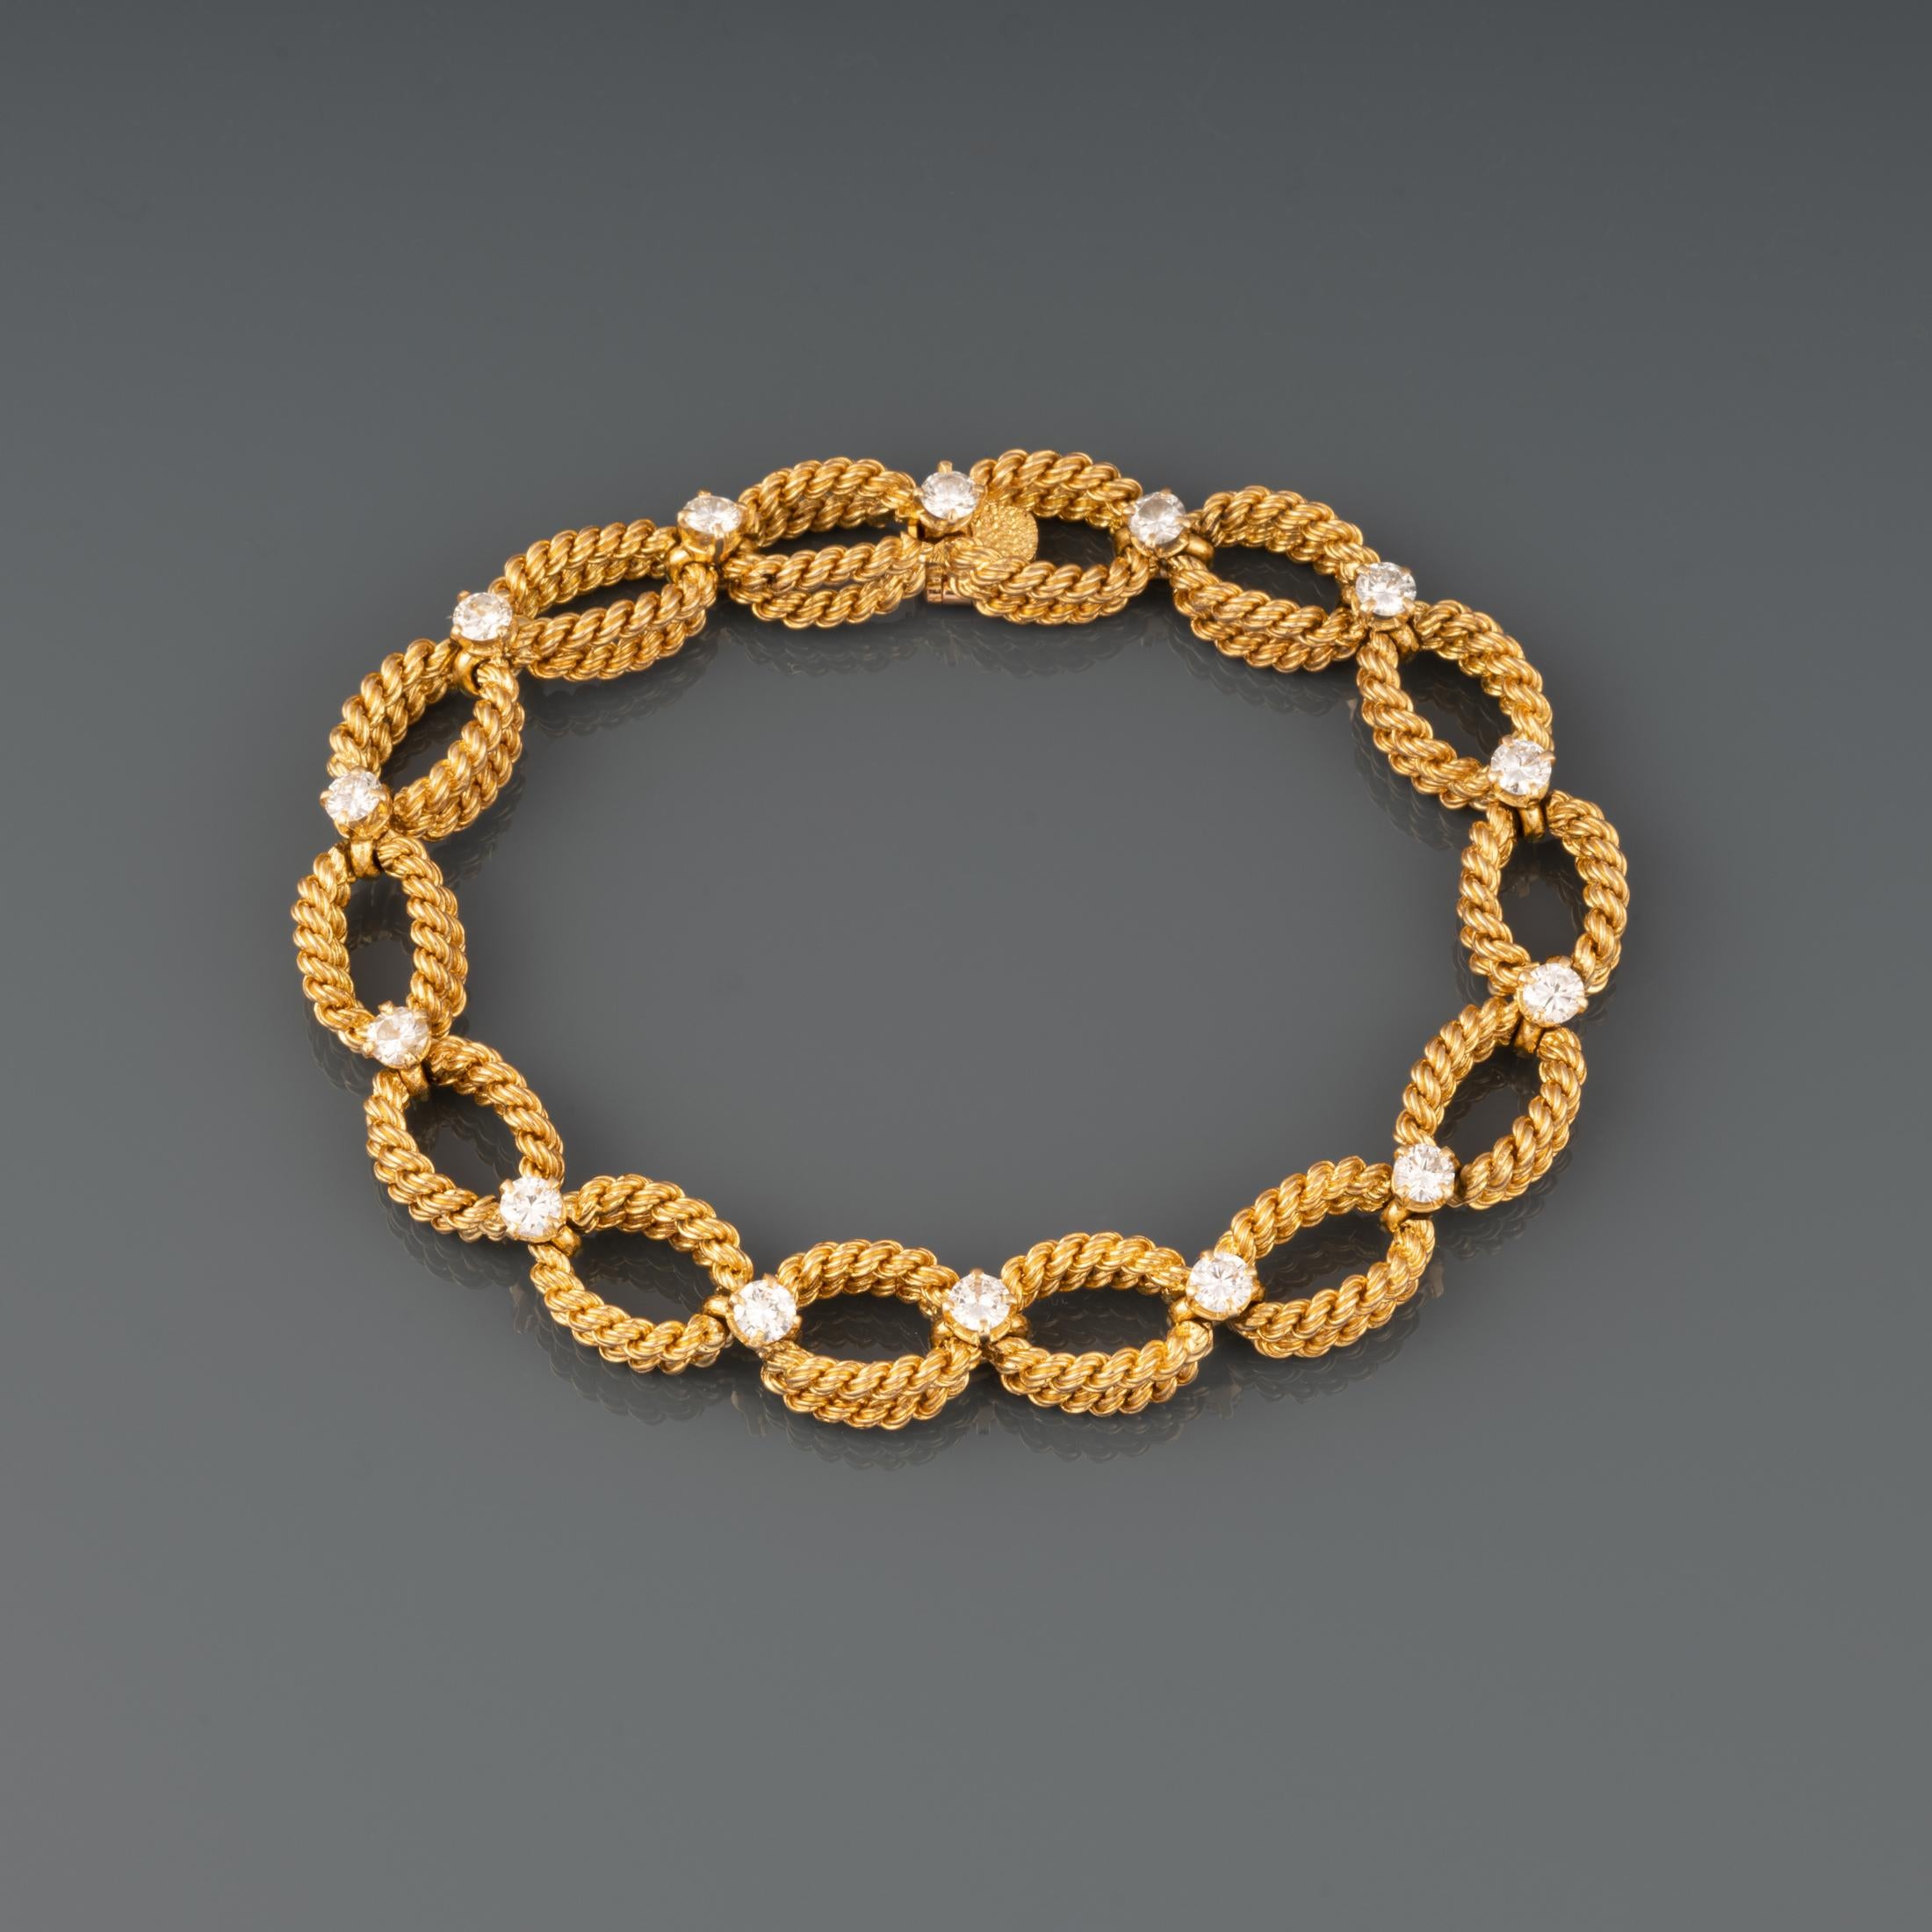 A very lovely vintage bracelet, made by Boucheron circa 1970.

Made in yellow gold 18K and set with approximately 1.40 carats of brilliant cut diamonds.

The width is 10mm.

The size is 18.5 cm.

Weight: 38.50 grams